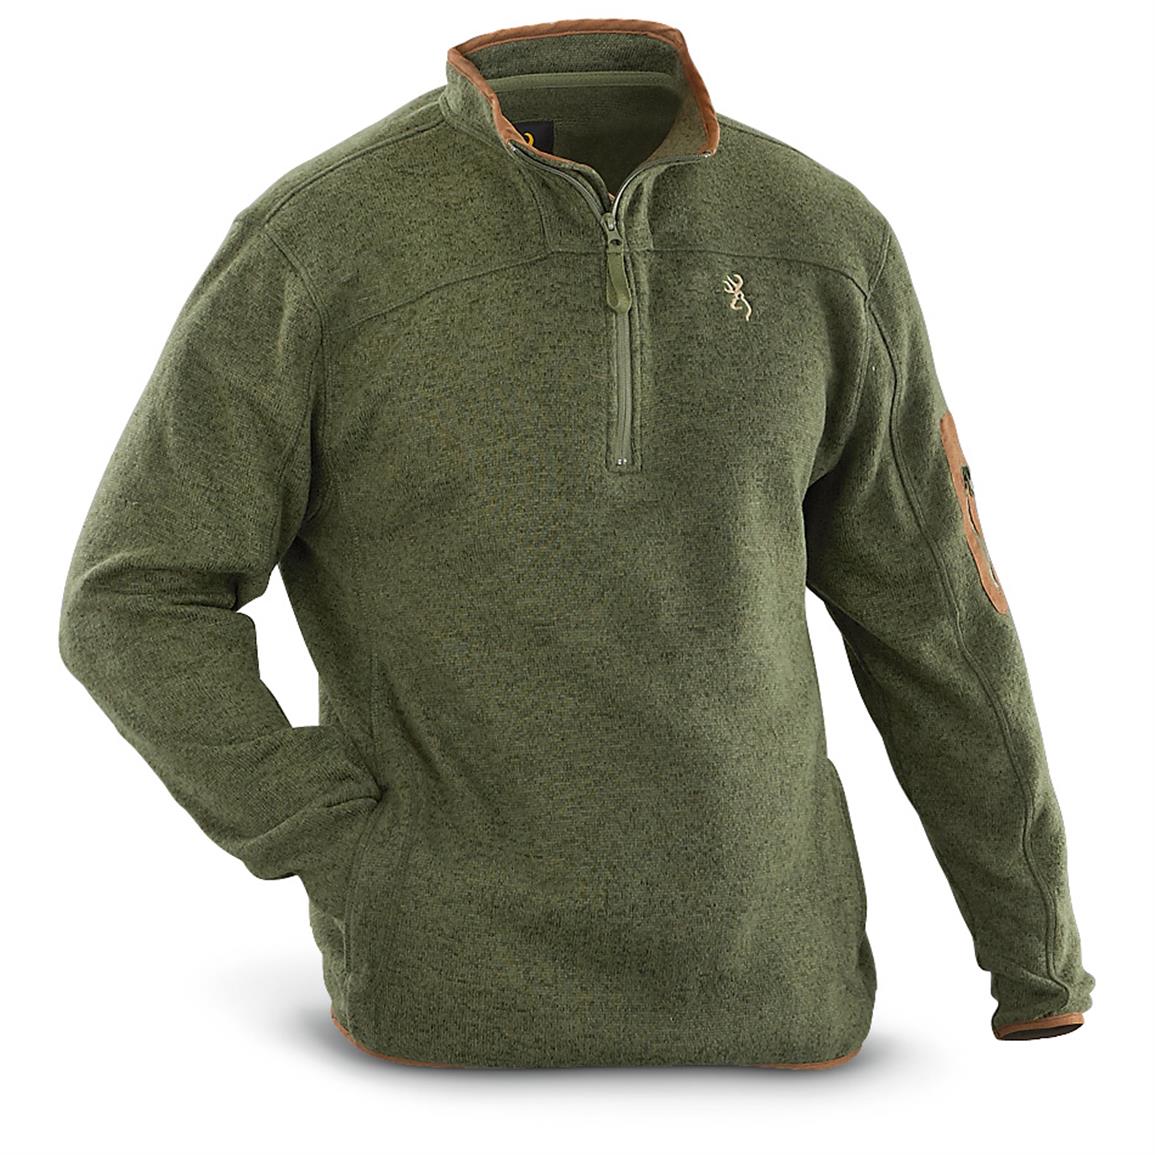 Browning® Laredo Sweater 608382, Sweaters at Sportsman's Guide